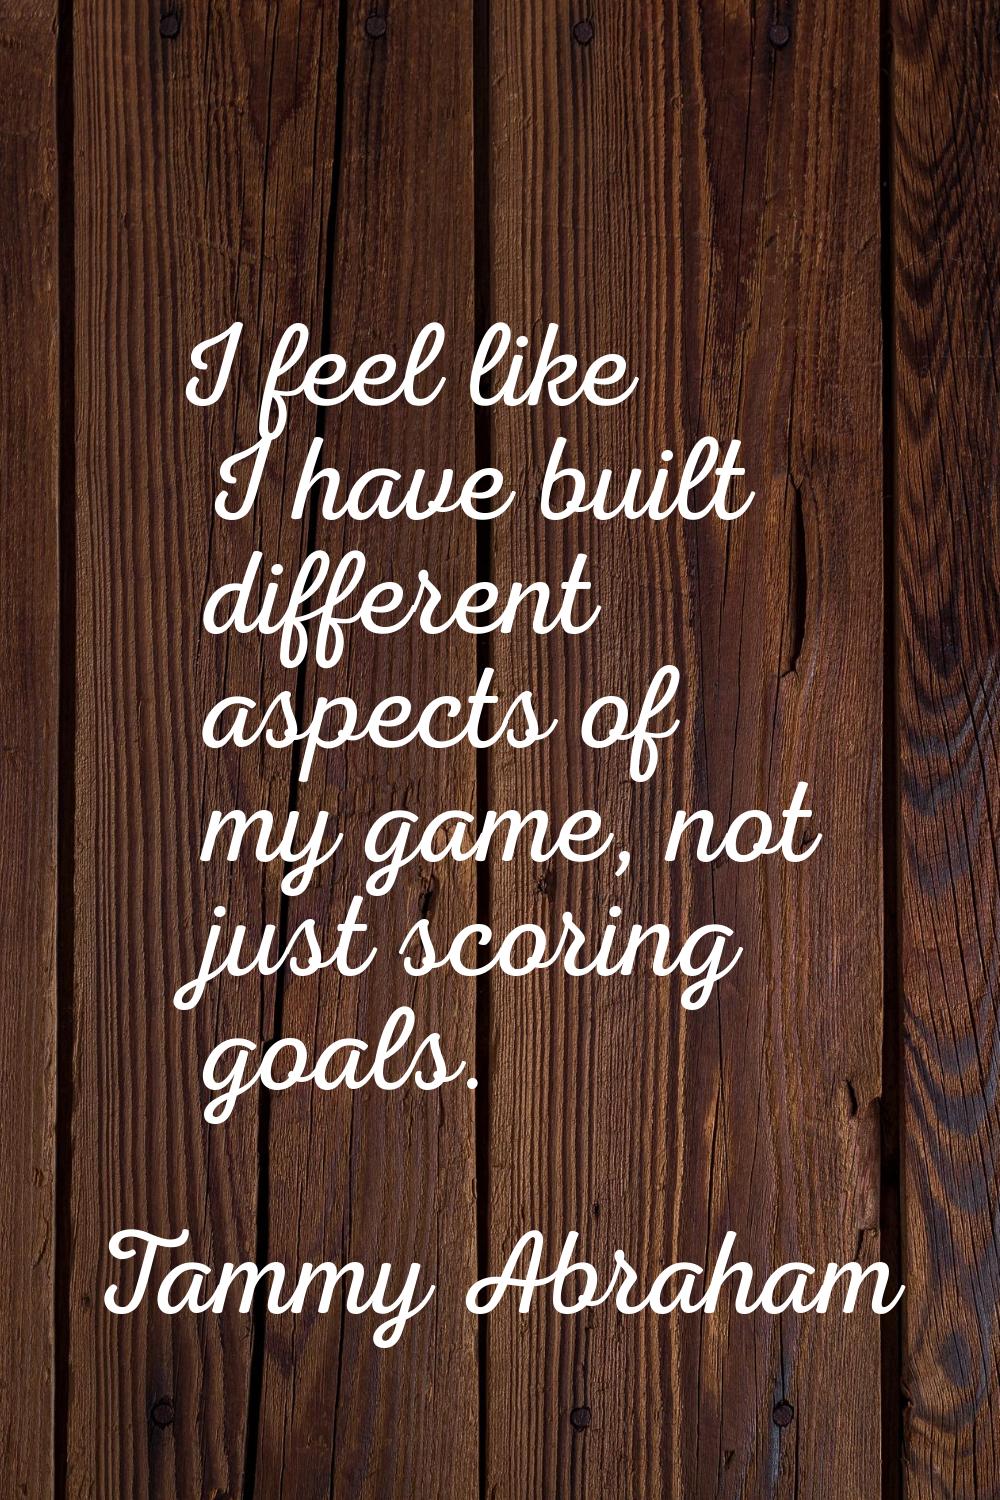 I feel like I have built different aspects of my game, not just scoring goals.